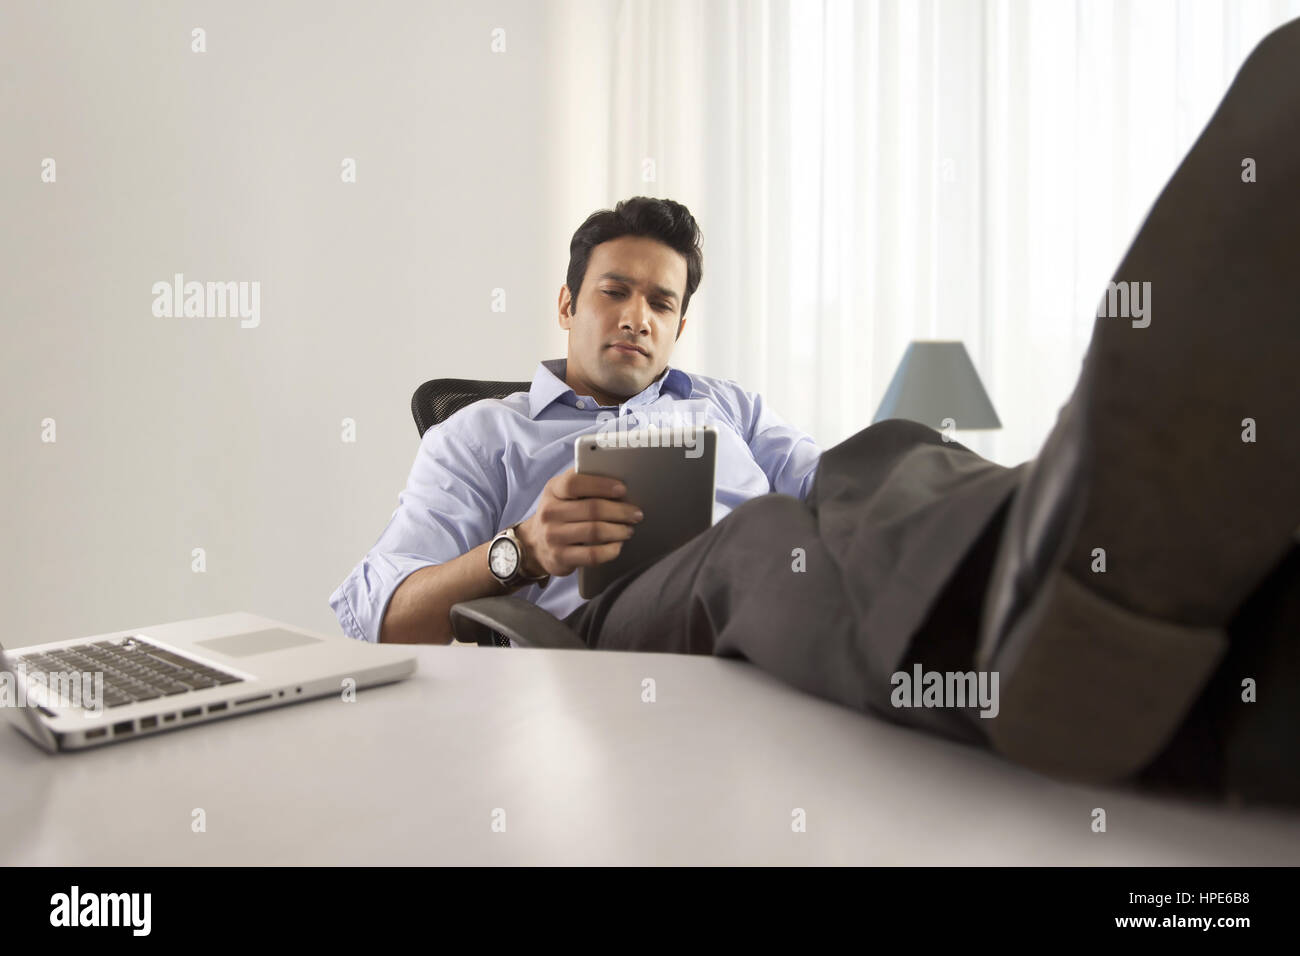 Portrait of a businessman at desk with his feet up and using digital tablet Stock Photo